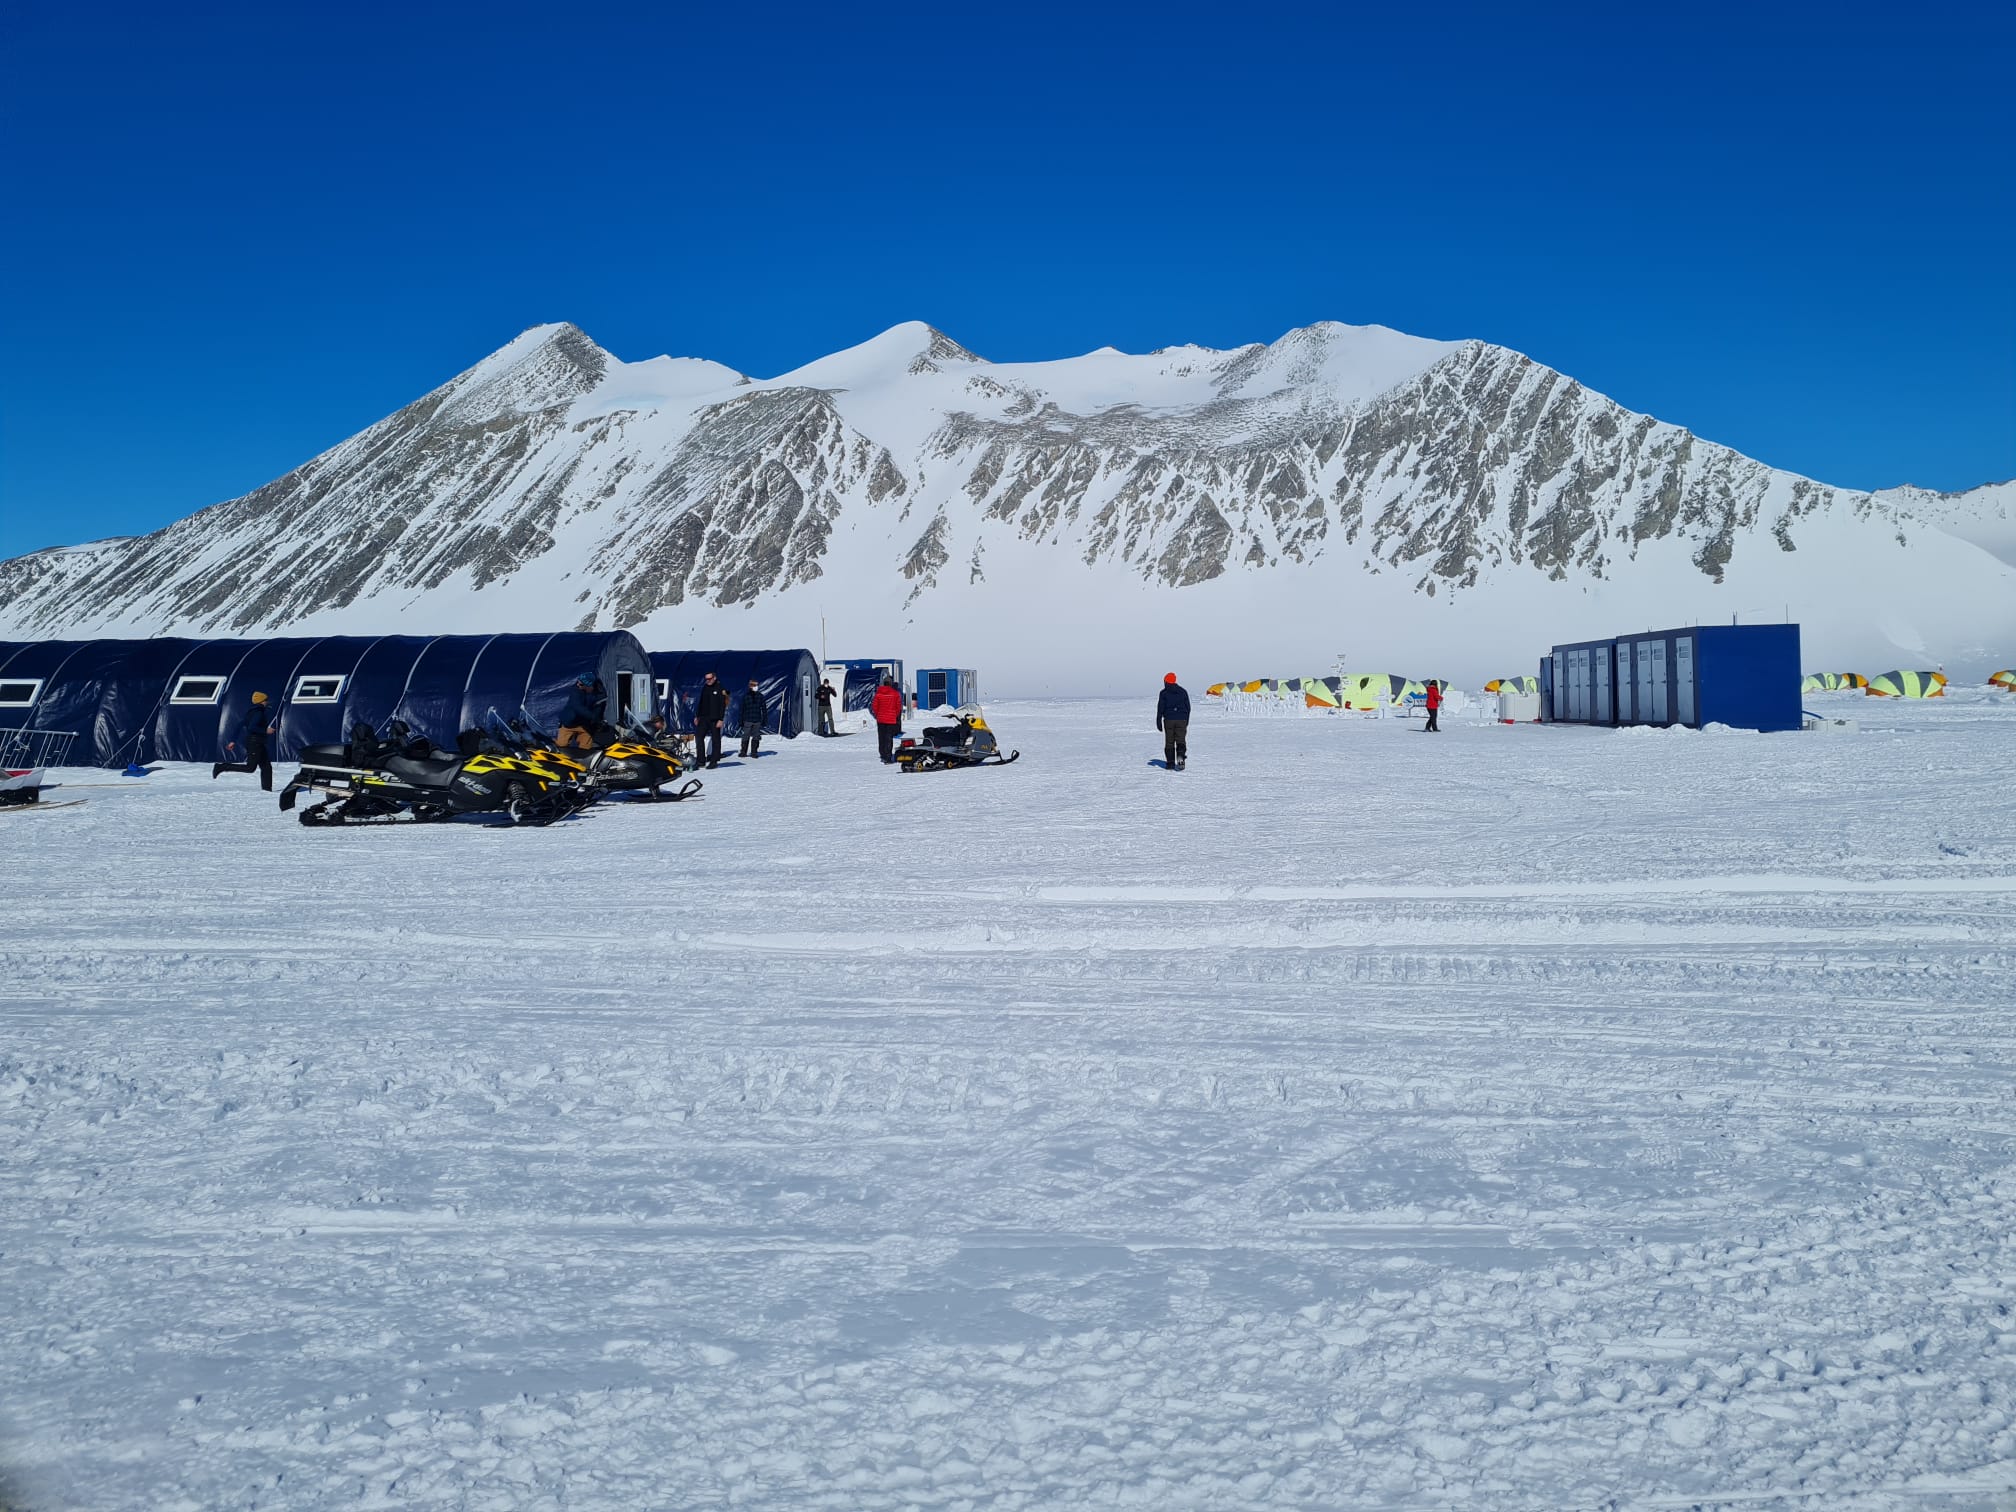 The logistical buildings, the runners' tents and in the background the Ellseworth Mountains Photo: Nir Andelman